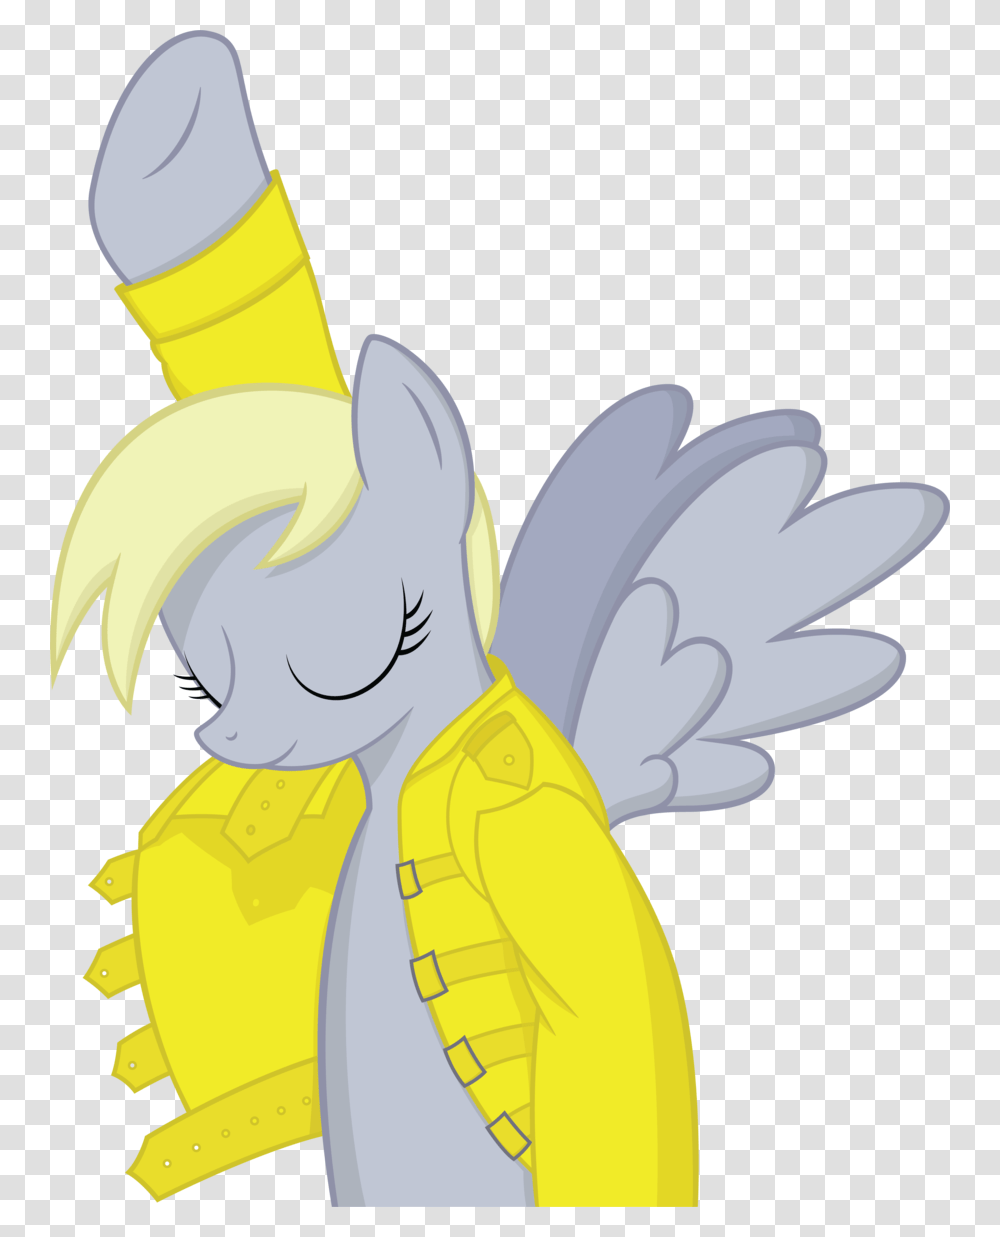 Pony Derpy Hooves Fluttershy Flower Yellow Flowering Freddie Mercury Pony, Face, Food, Plant Transparent Png